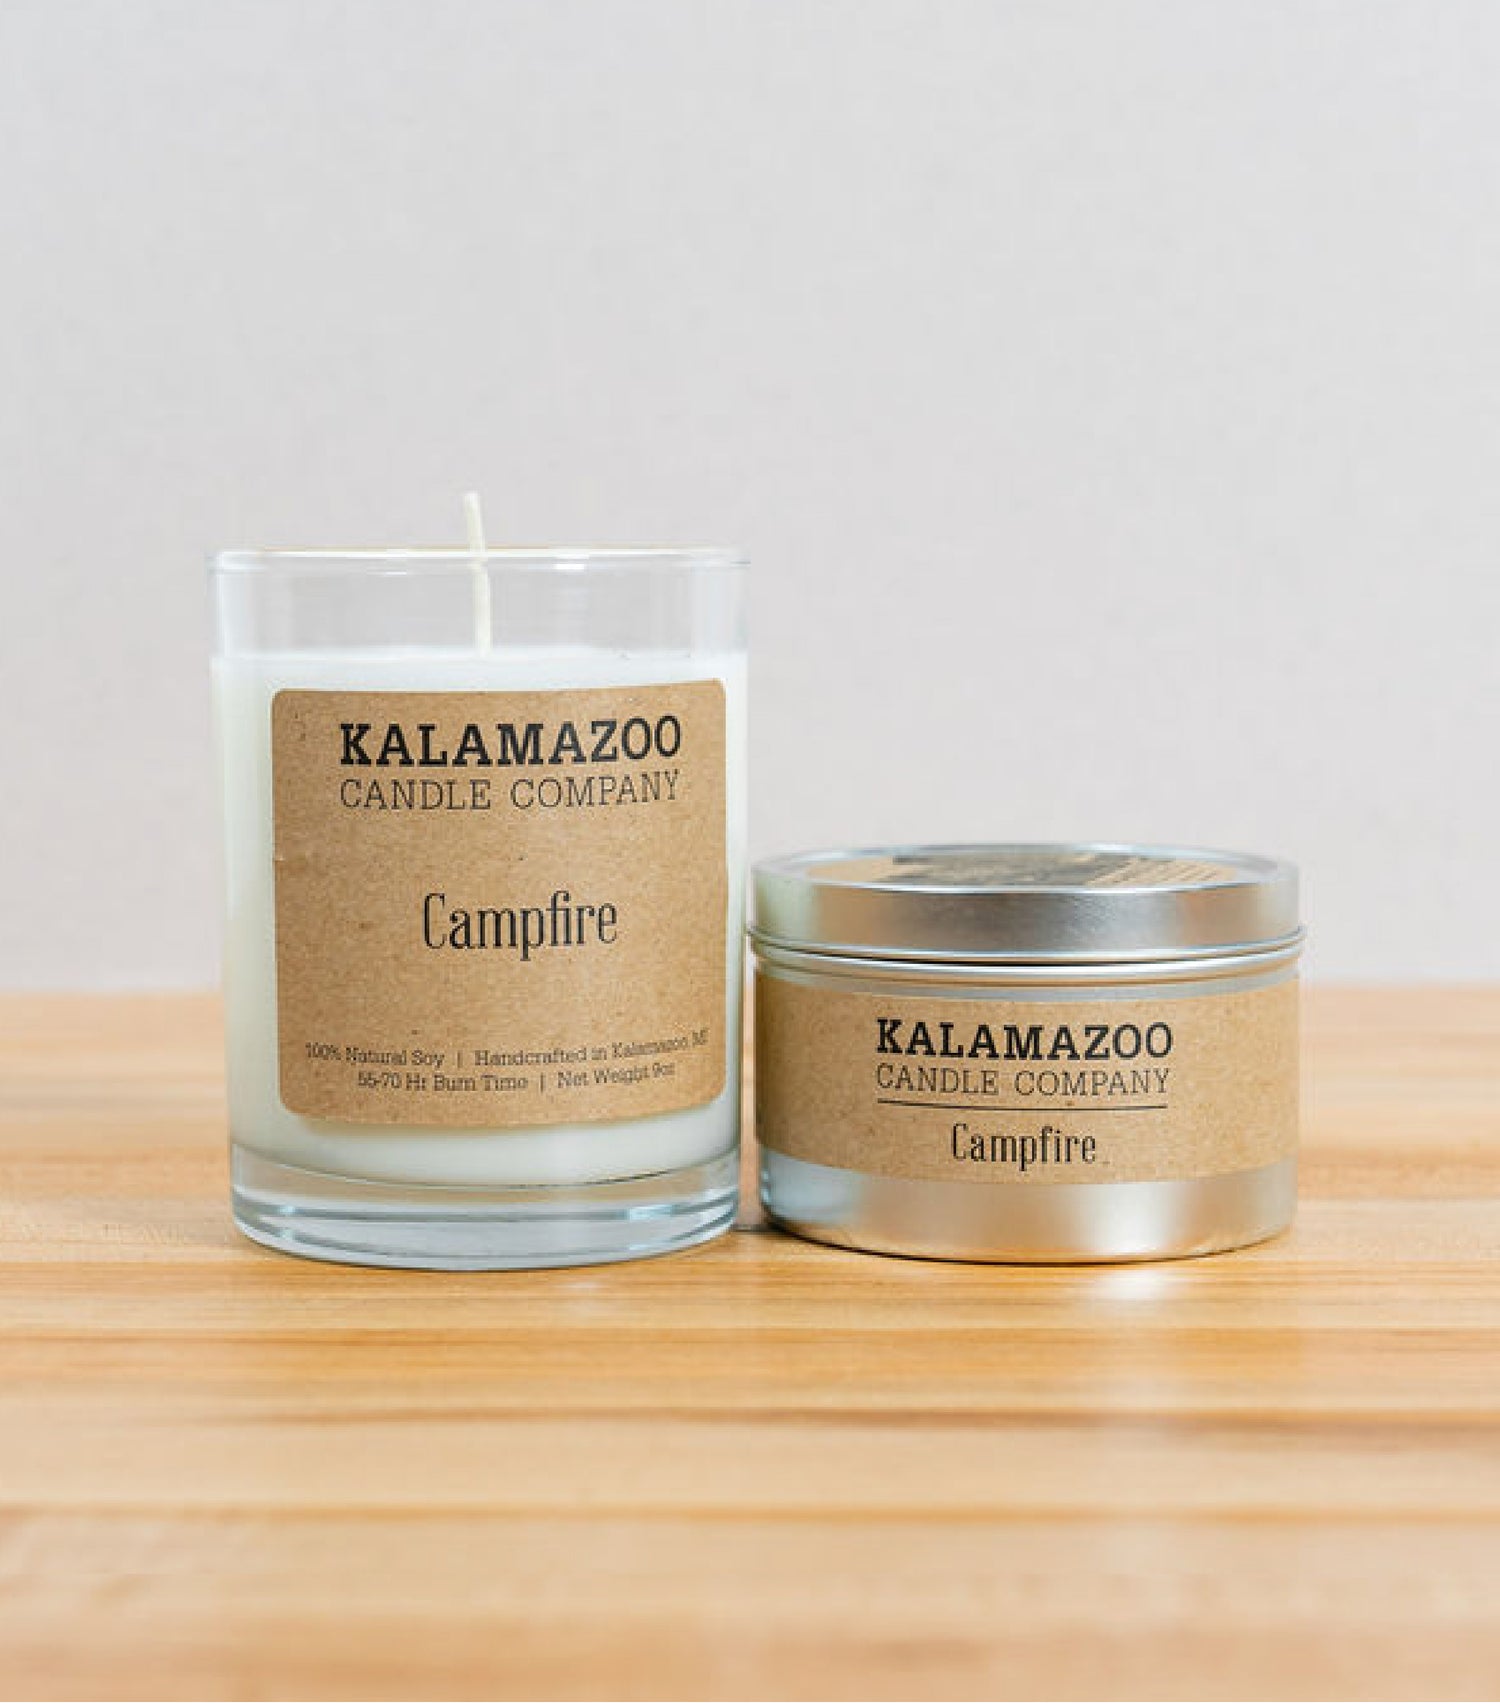 Campfire Candles Aromatic balsam and warm patchouli dappled with forest wildflowers ignites memories with this classically cozy soy candle. All Kalamazoo Candles are: 100% natural scented soy wax; produced using locally sourced and American-made materials.